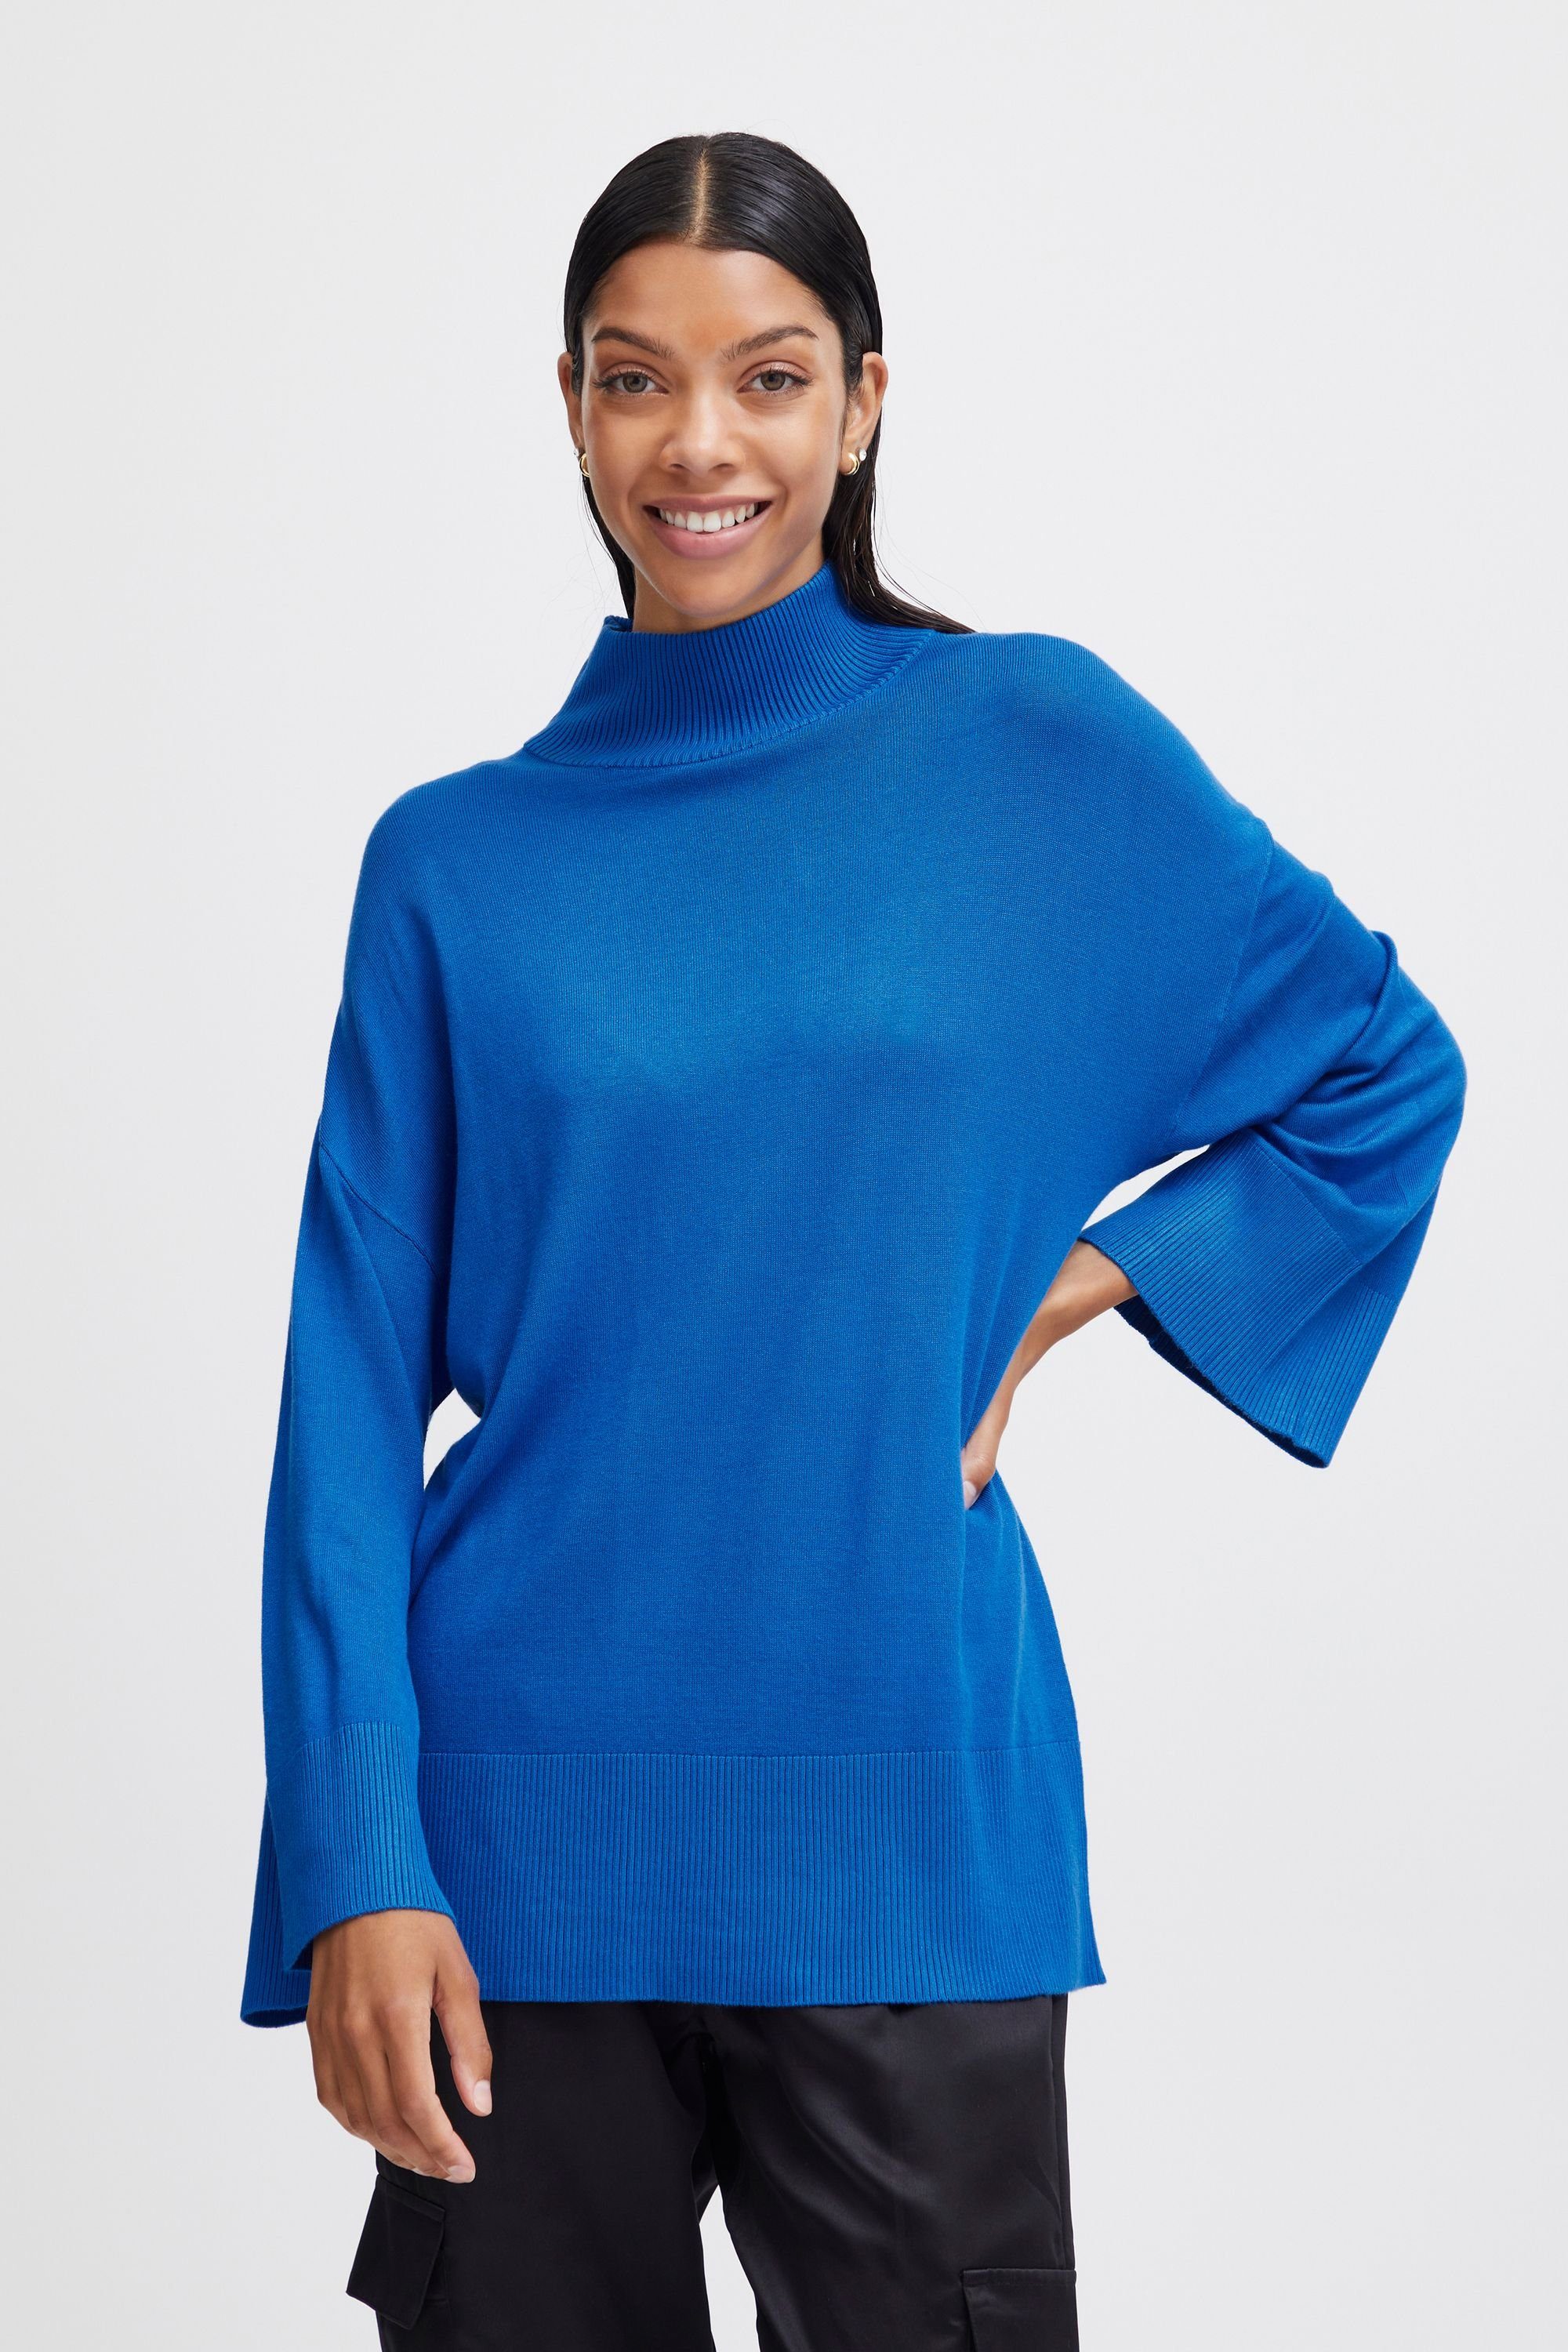 (194050) LOOSE TURTLENECK Nautical - b.young BYMMPIMBA1 Blue 20813512 Strickpullover